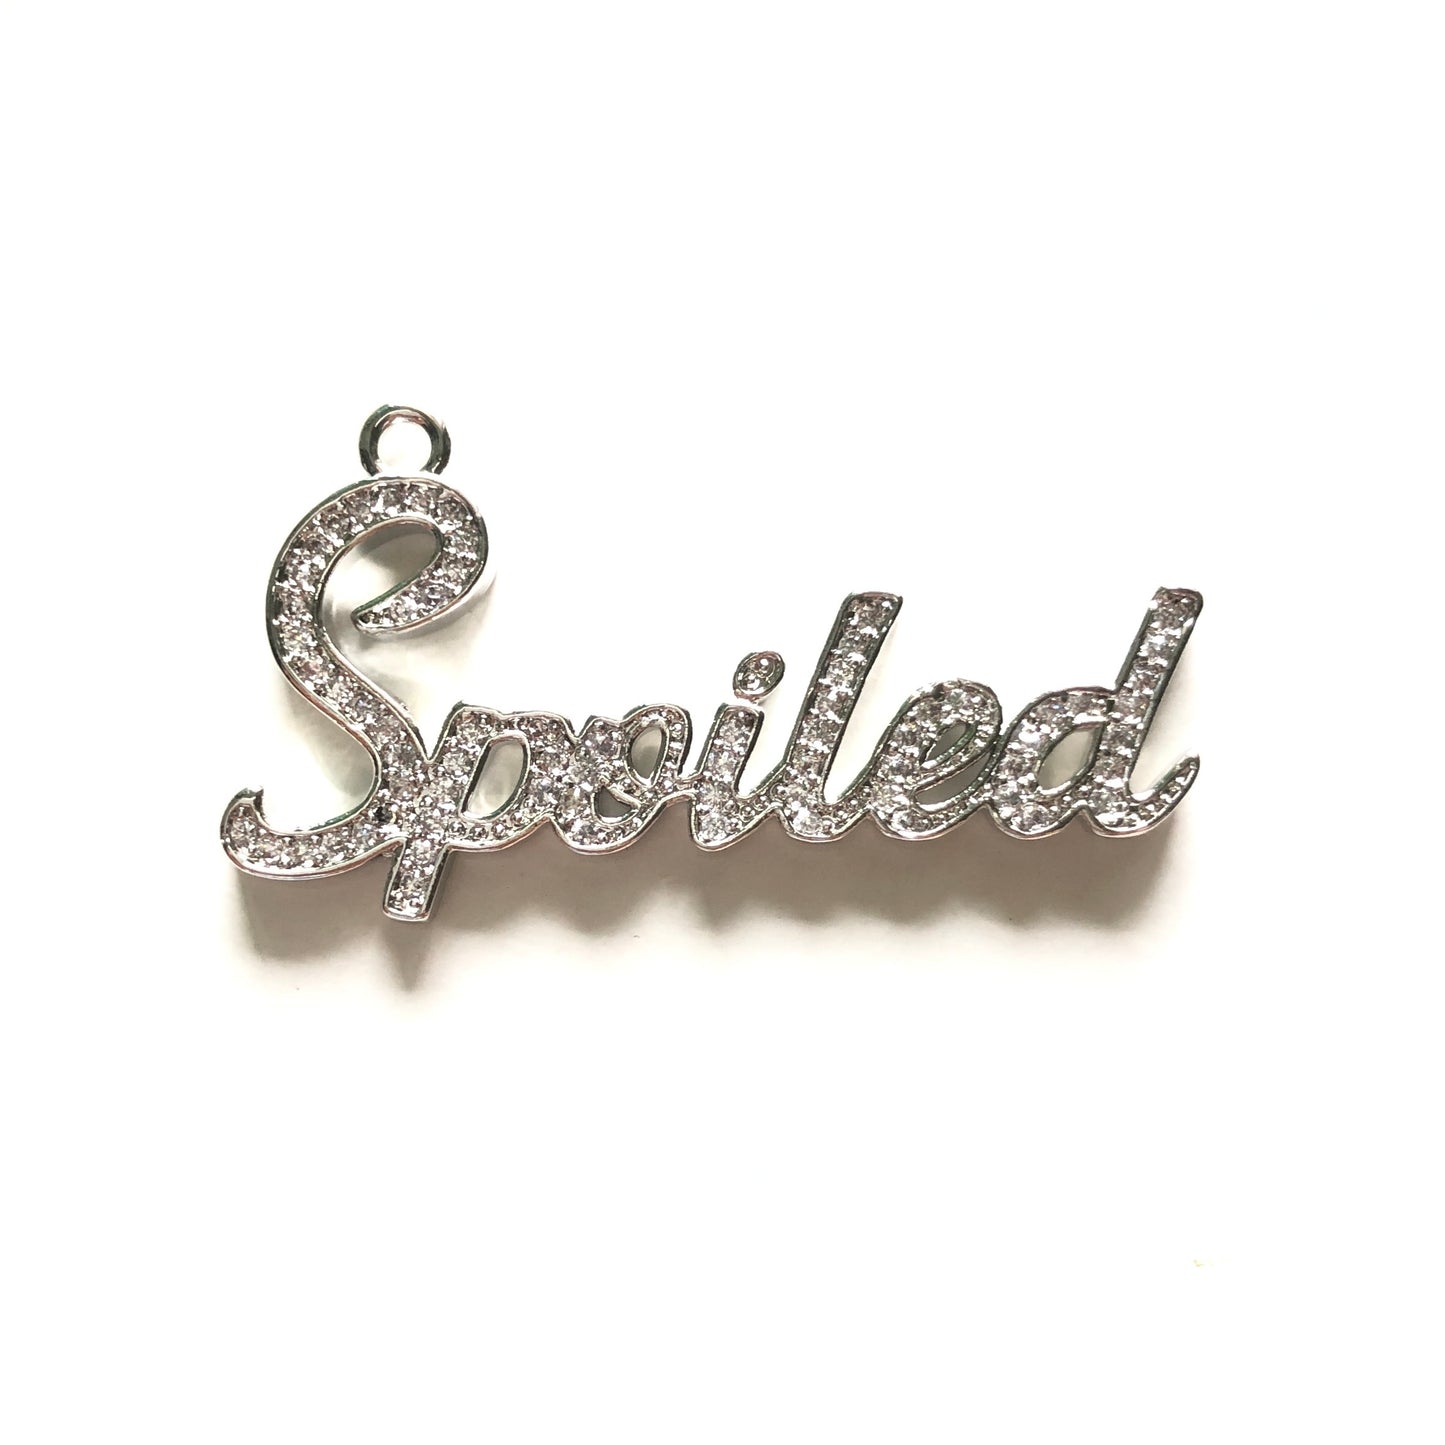 10pcs/lot 38*20.5mm CZ Paved Spoiled Charms Silver CZ Paved Charms Words & Quotes Charms Beads Beyond